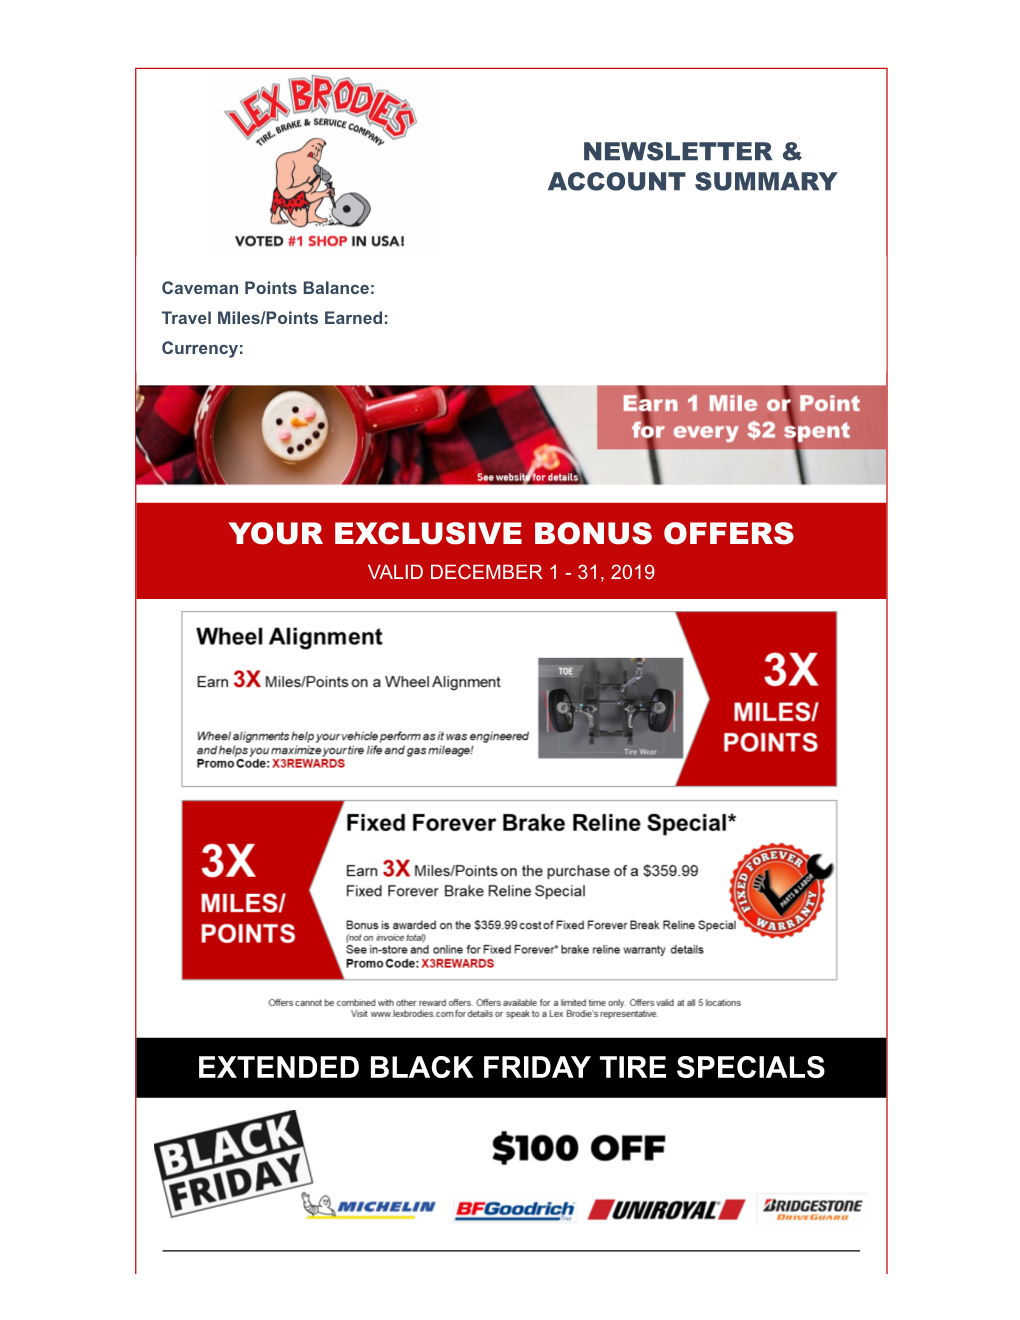 Your Exclusive Bonus Offers Extended Black Friday Tire